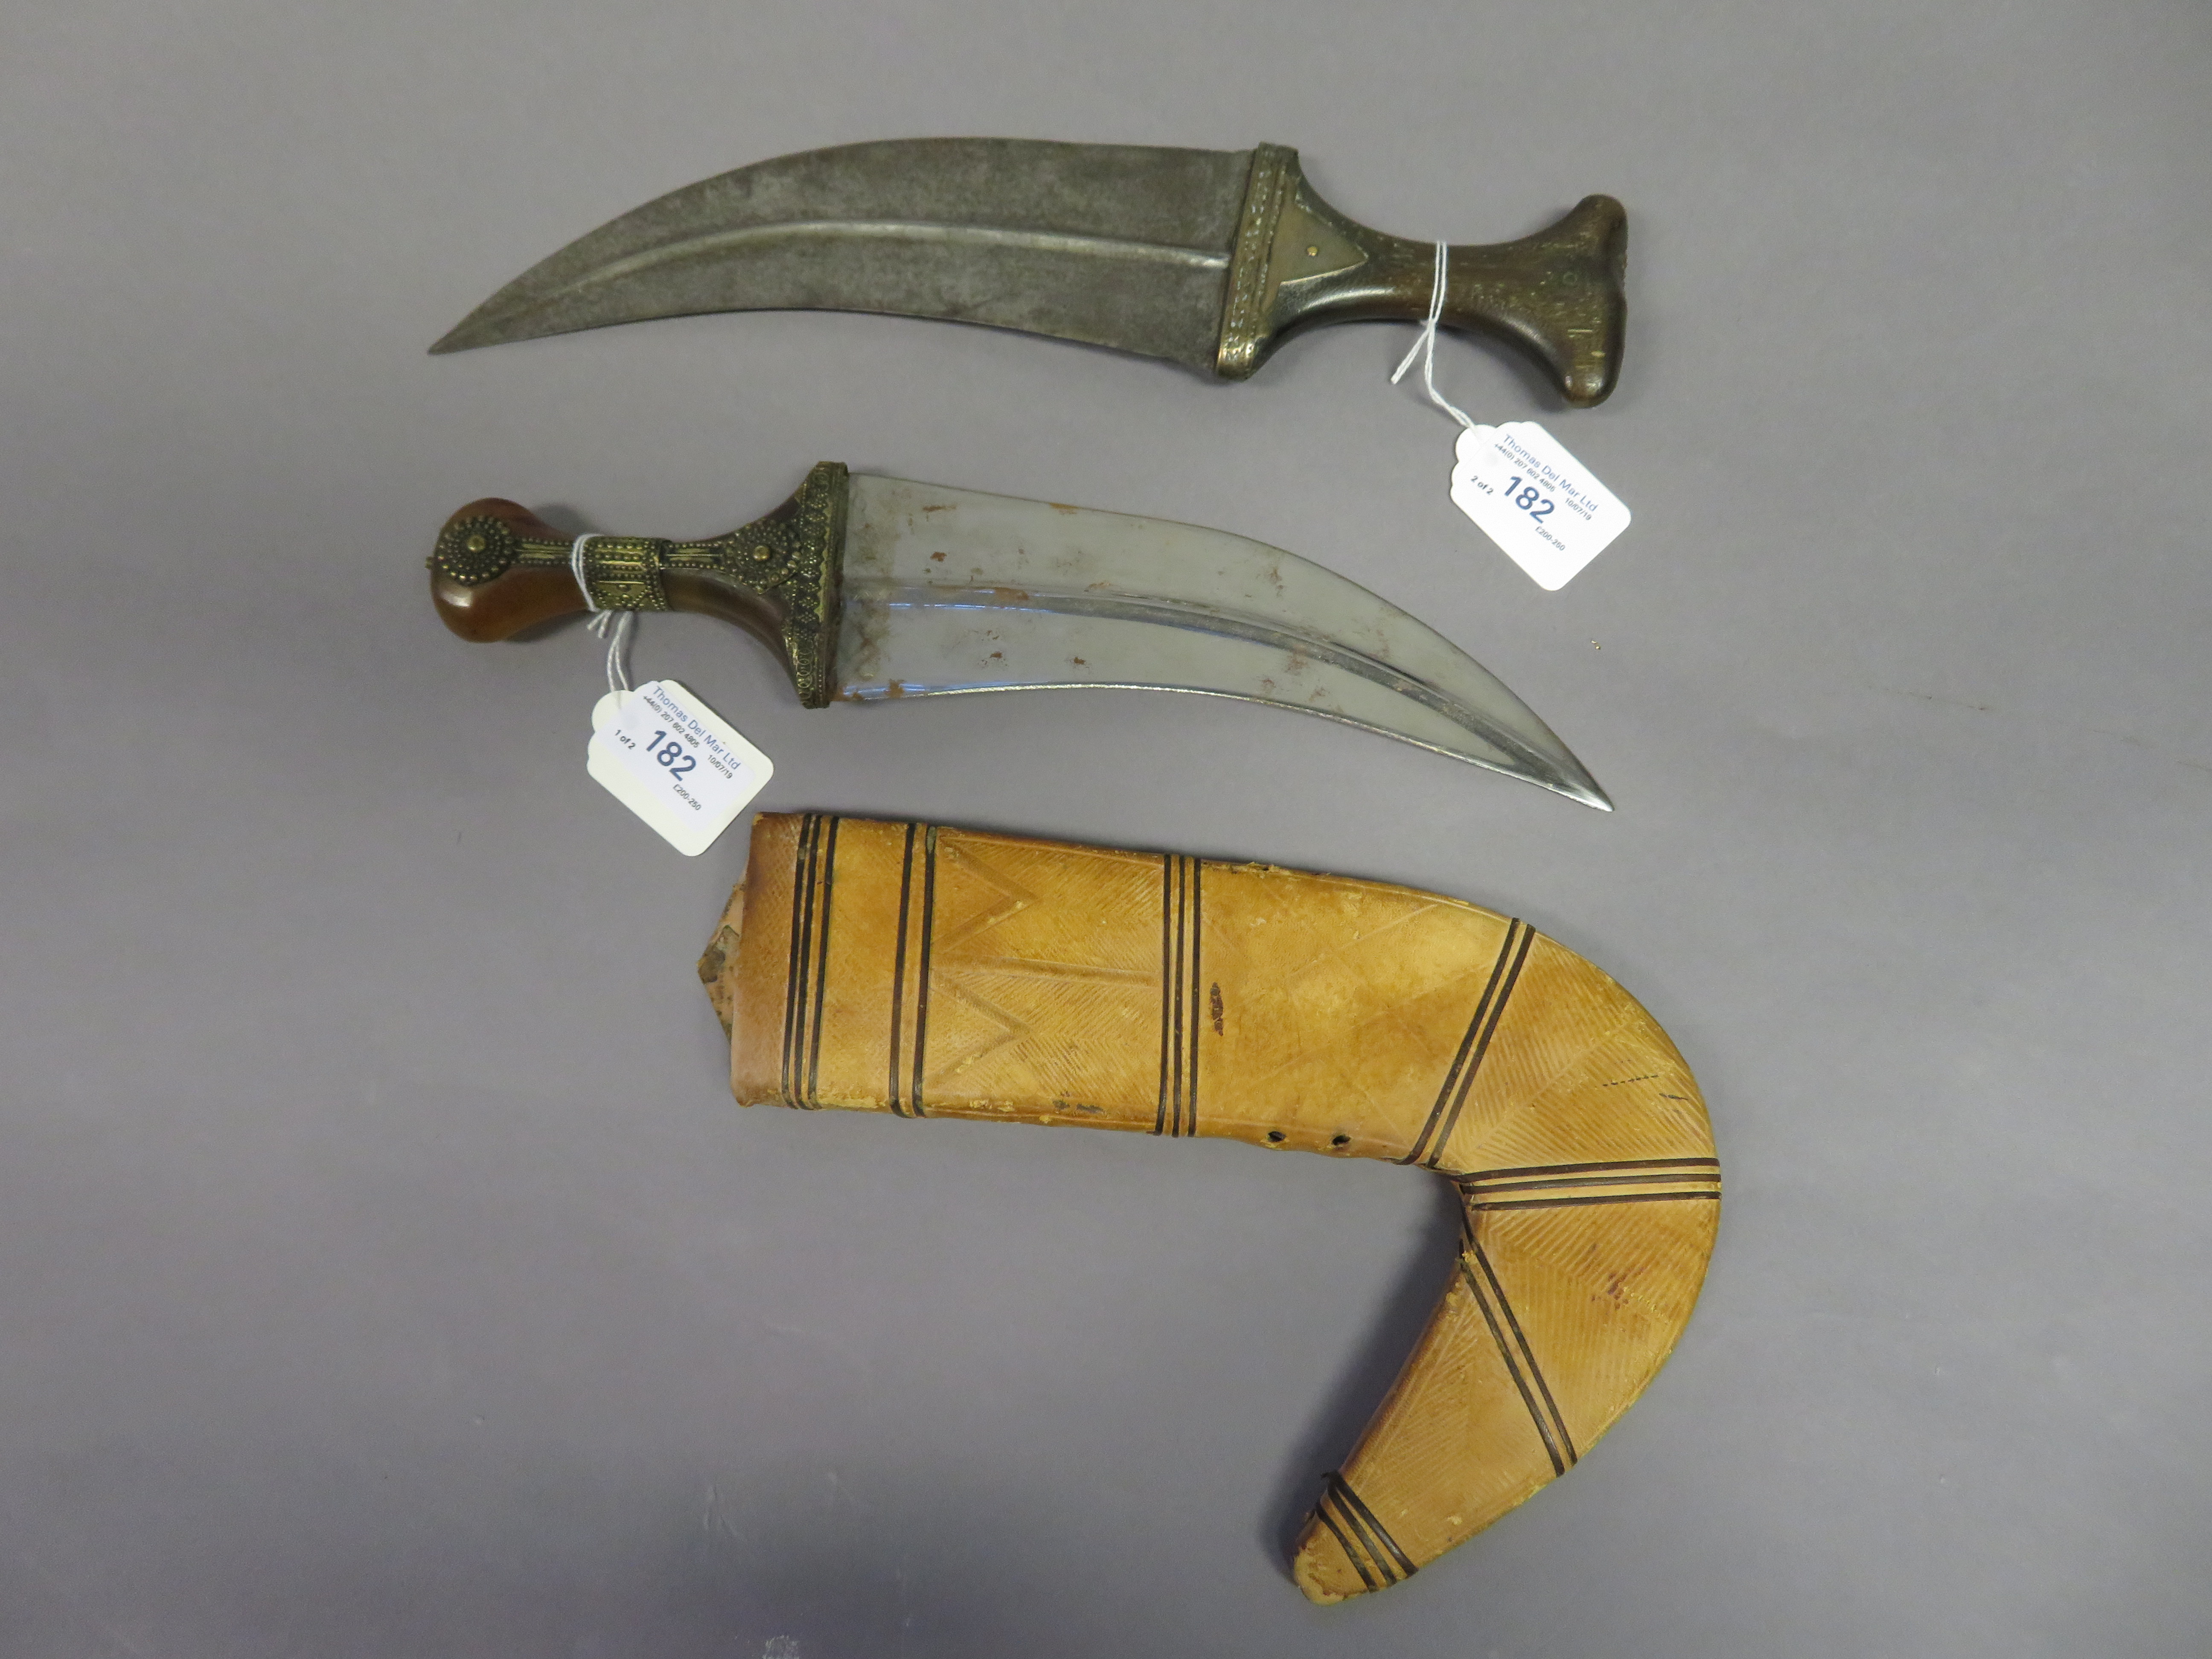 TWO ARAB DAGGERS (JAMBIYA), LATE 19TH/EARLY 20TH CENTURY each with broad curved blade formed with